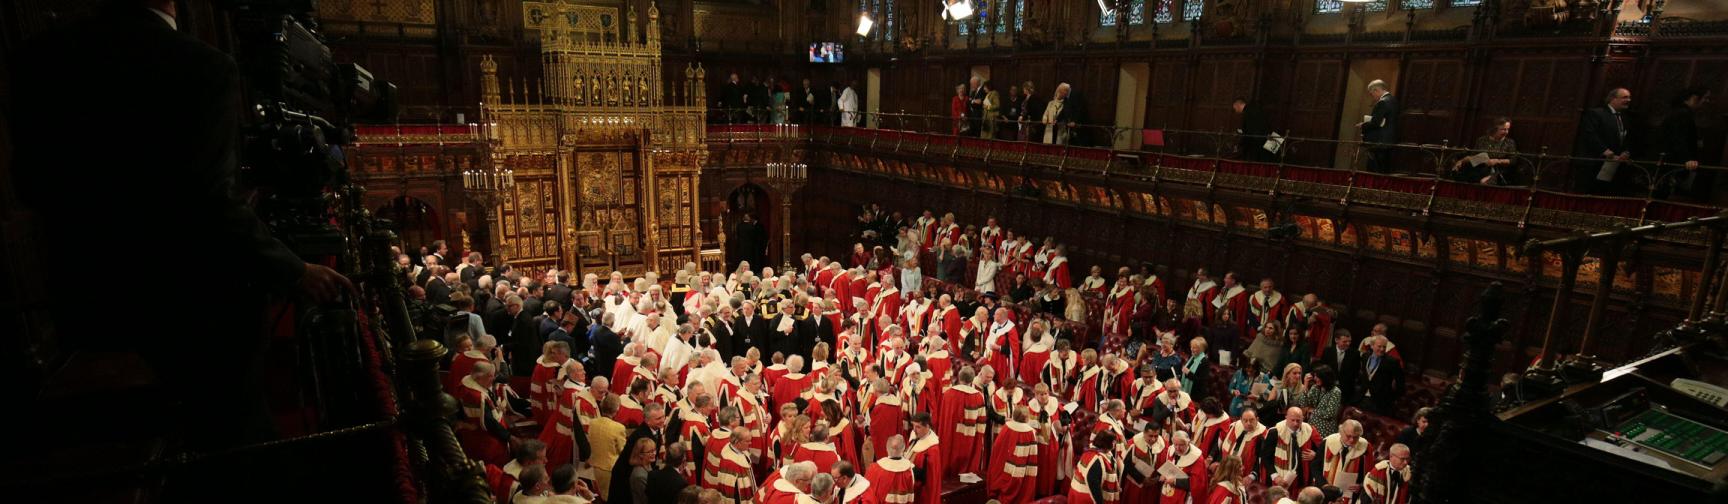 Members of the House of Lords and guests leave the chamber following the State Opening of Parliament by Queen Elizabeth II